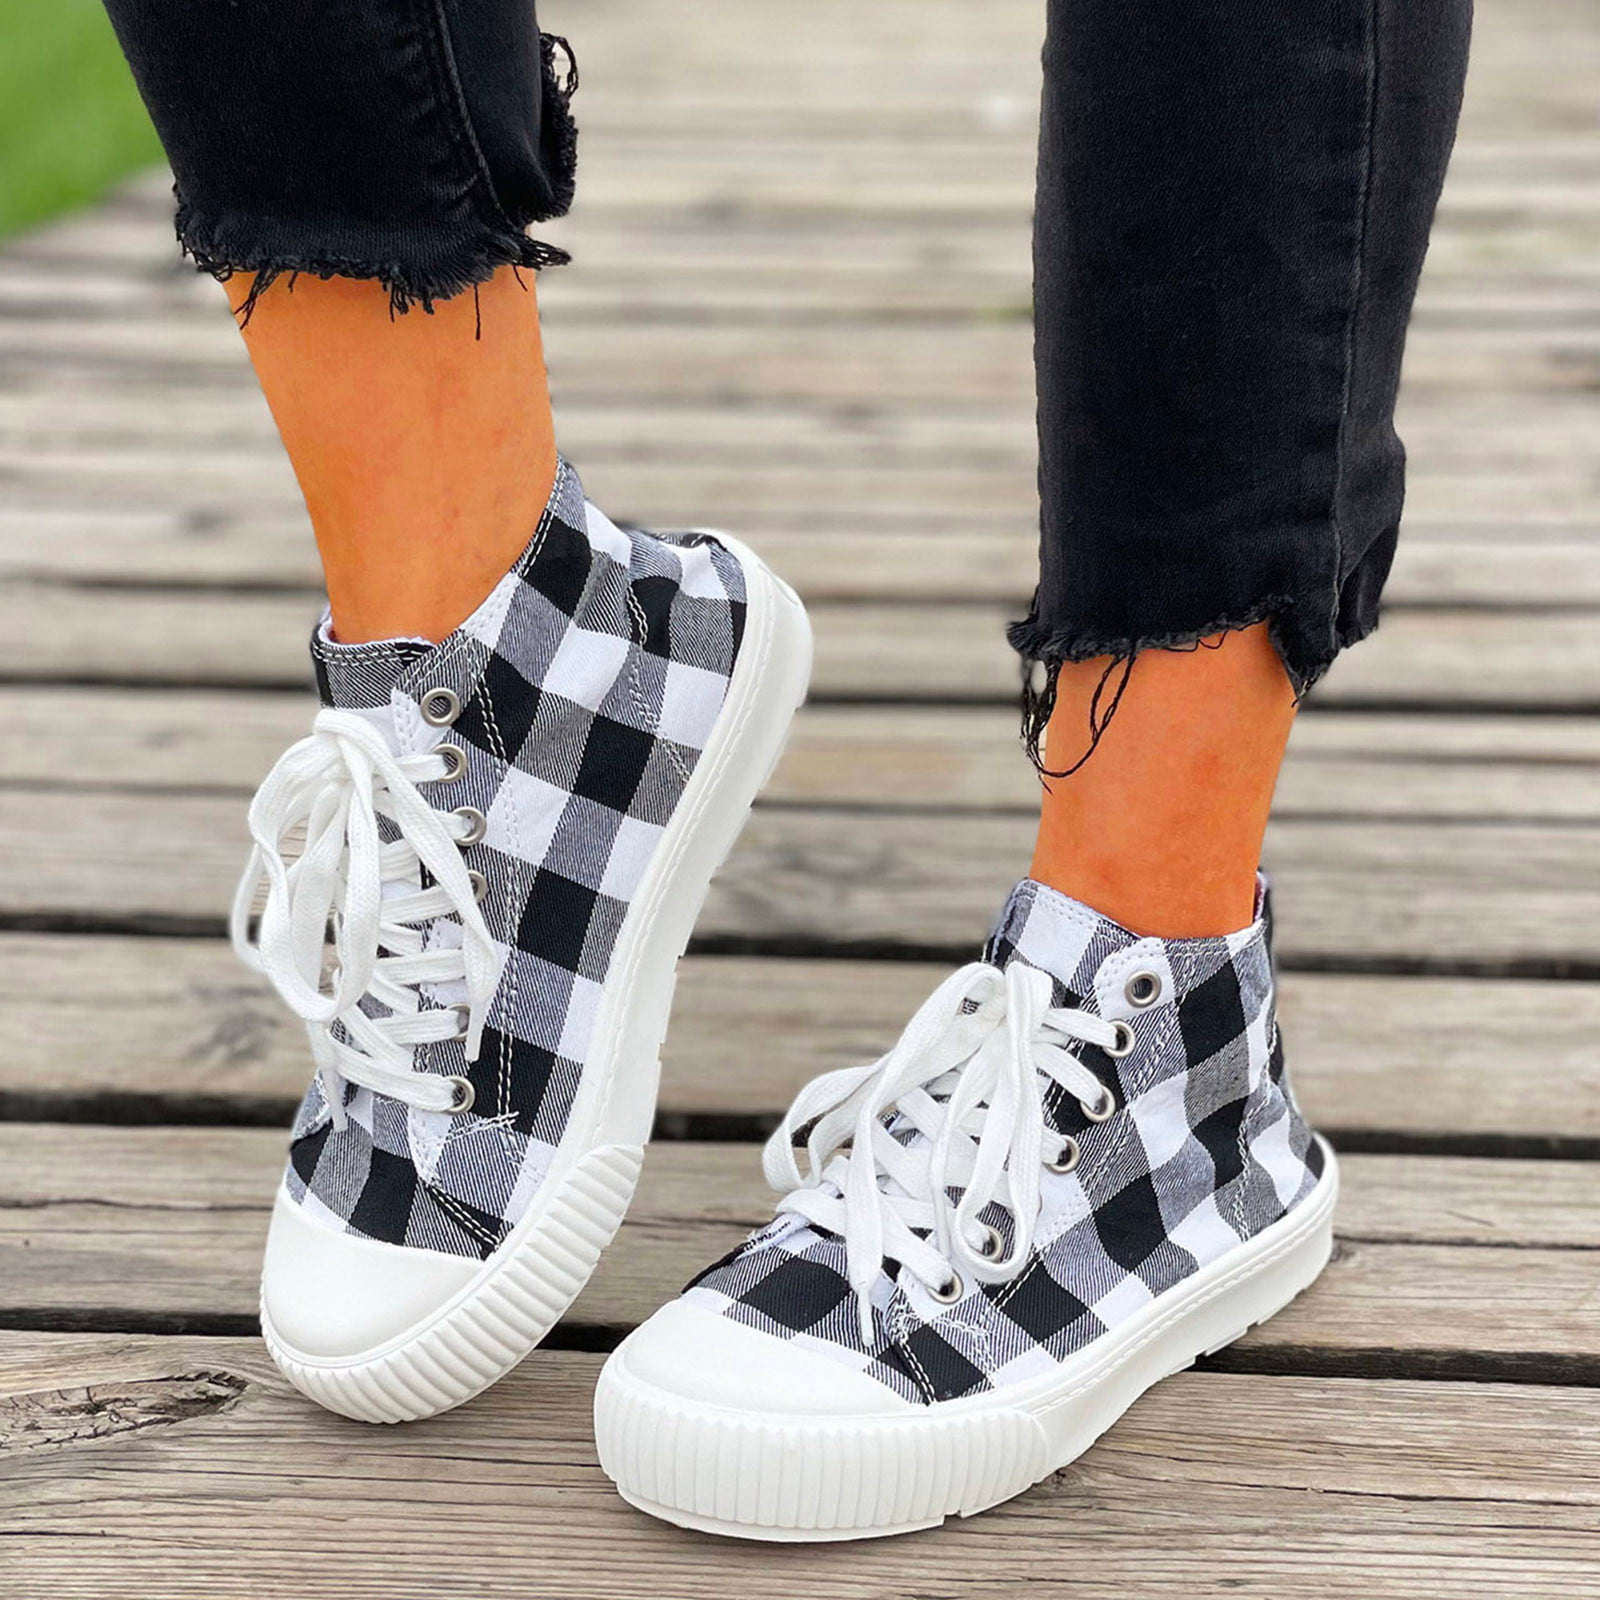 Women Flats Canvas Skate Shoes Sports Outdoor Girl Lace Up Casual Board Sneakers 